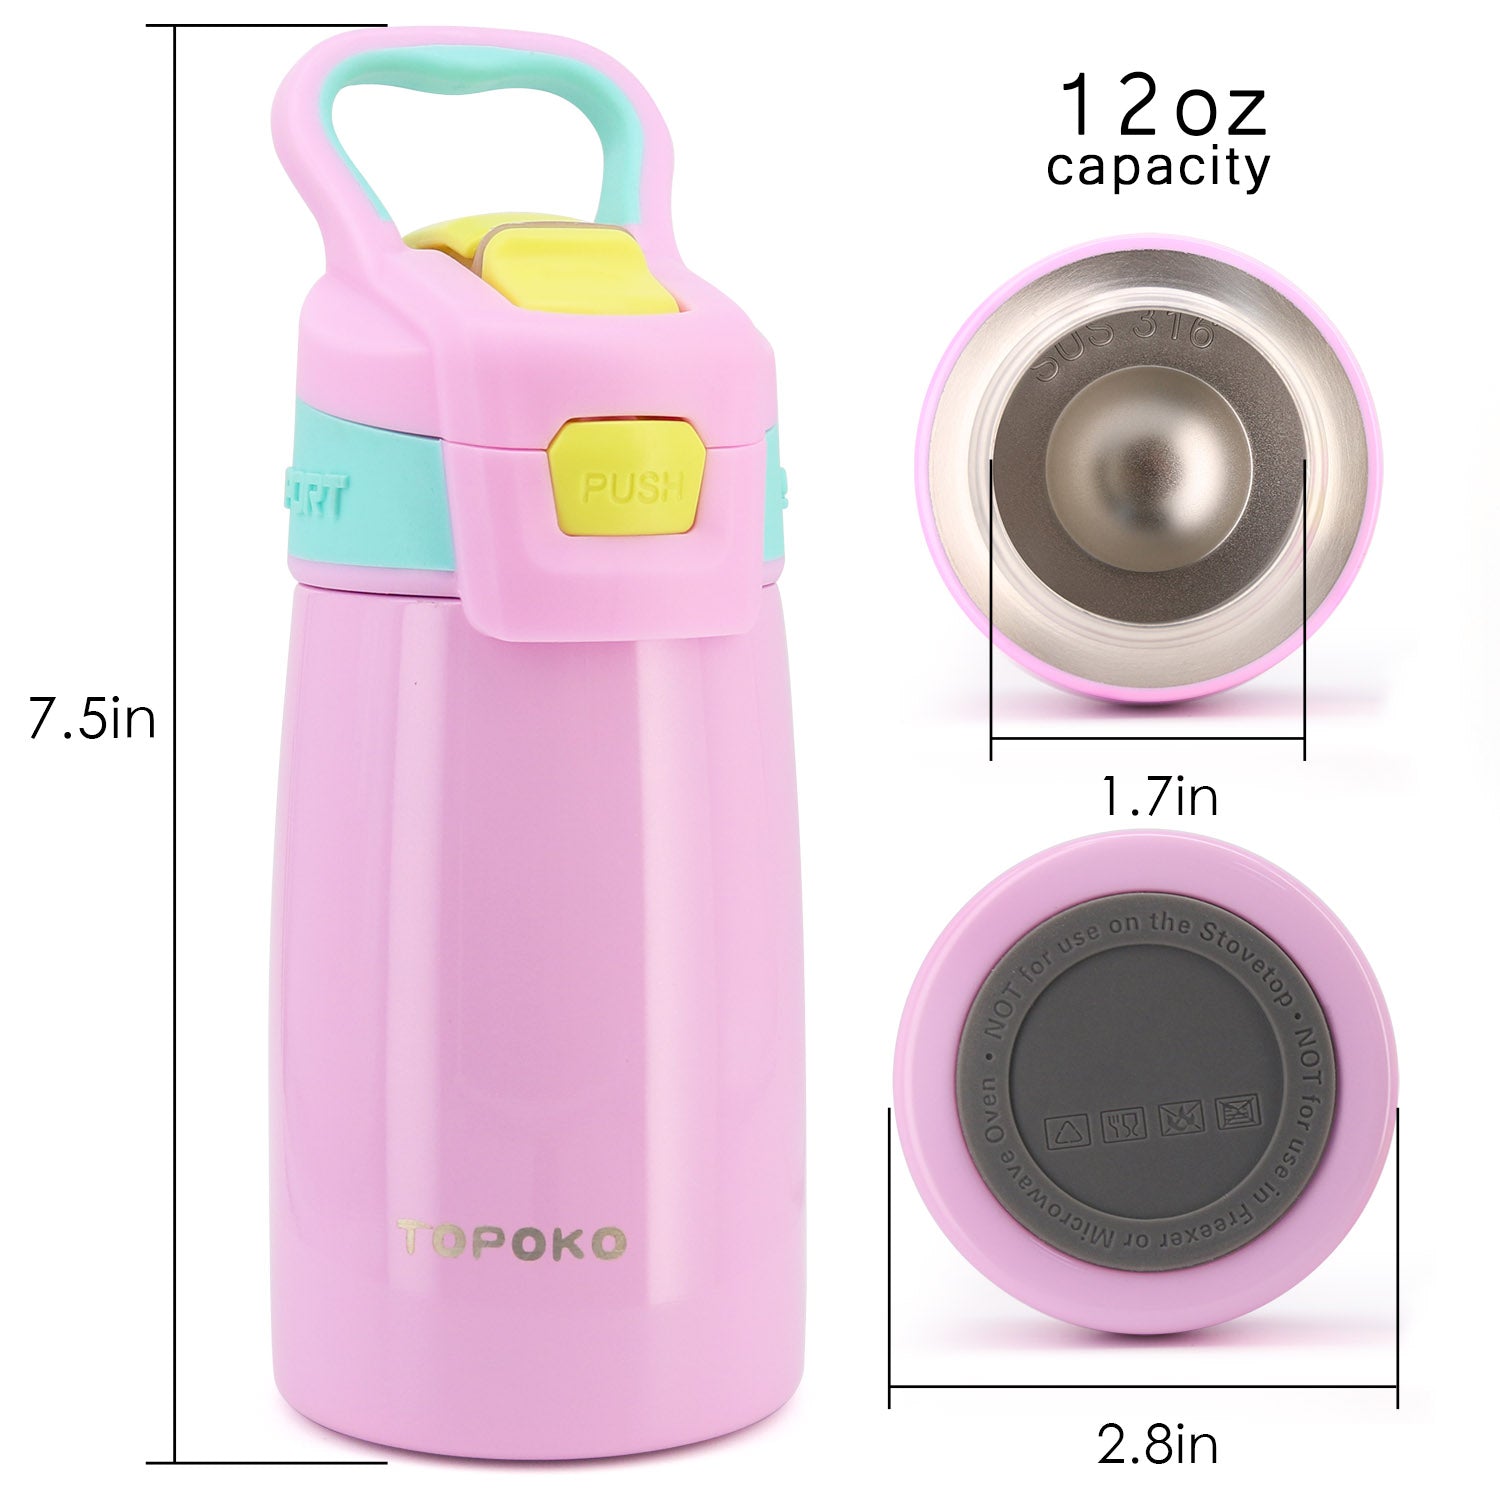 TOPOKO Kid's Auto Flip Stainless Steel Double Wall Water Bottle, Vacuum Insulated, Sweat Proof, Leak Proof, Wide Mouth, with Carrying Handle-12 OZ